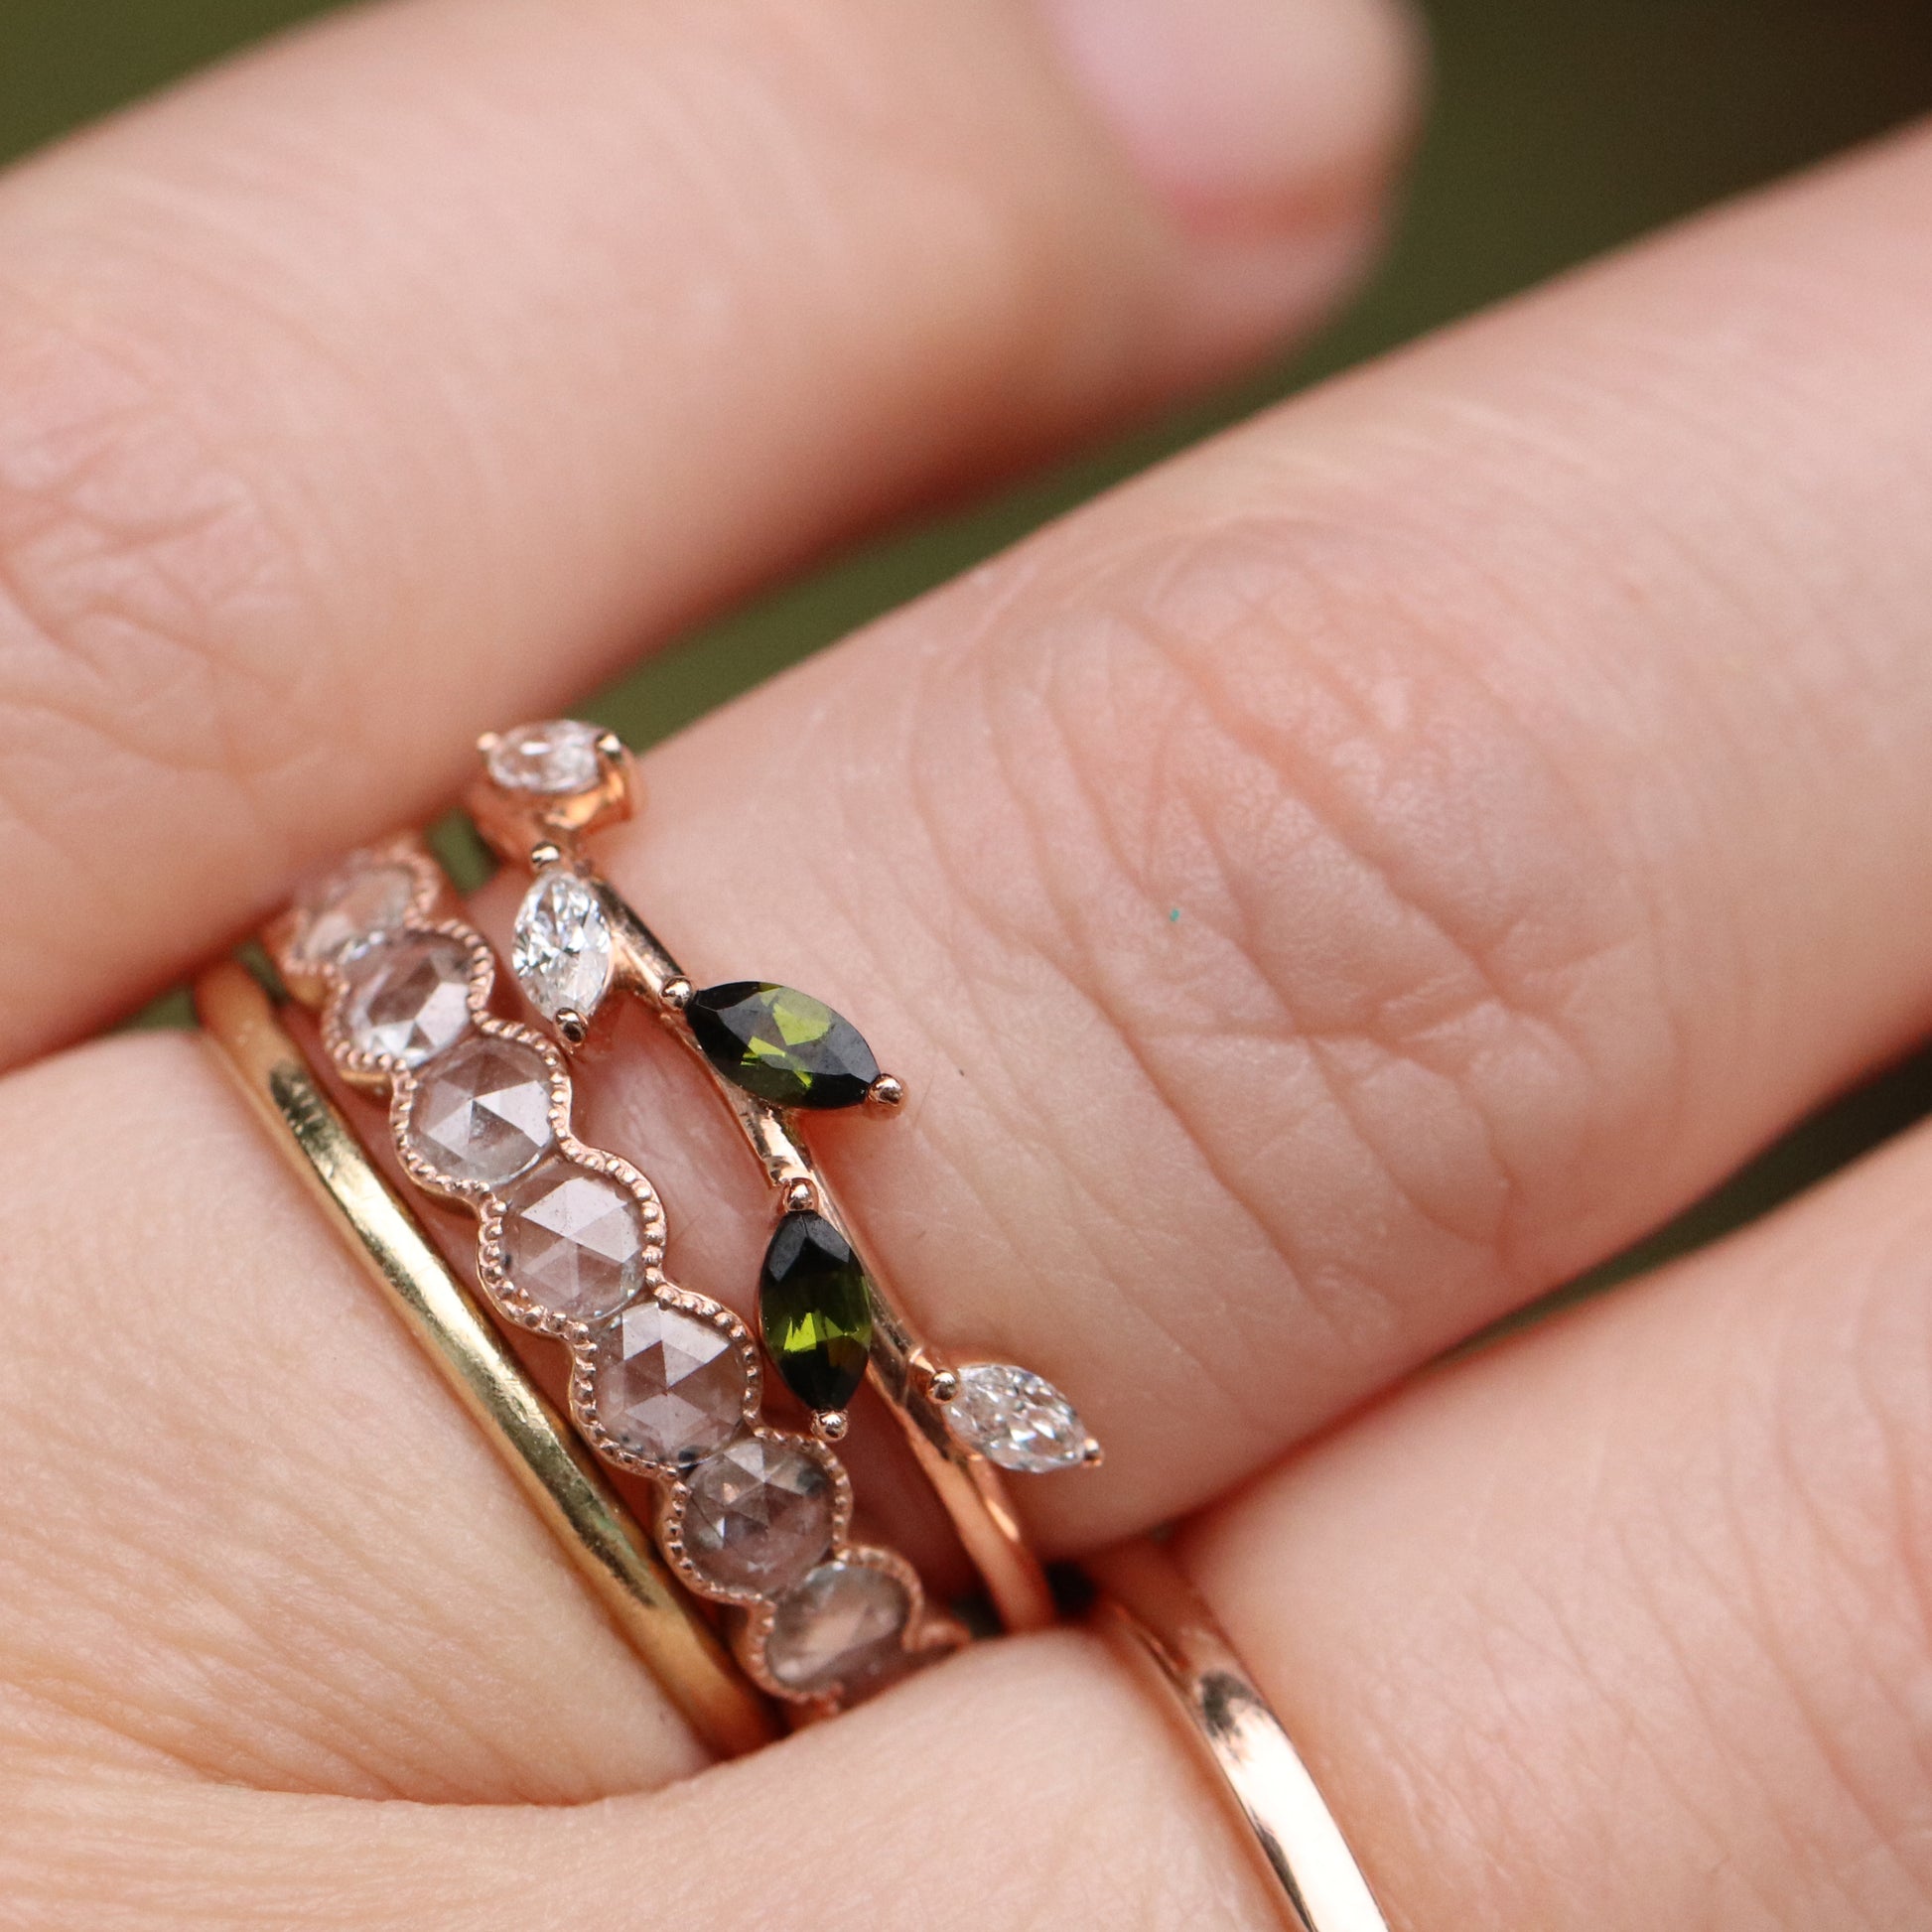 Briar Rose - Stacking Ring and Wedding Band in Your Choice of 14K Gold